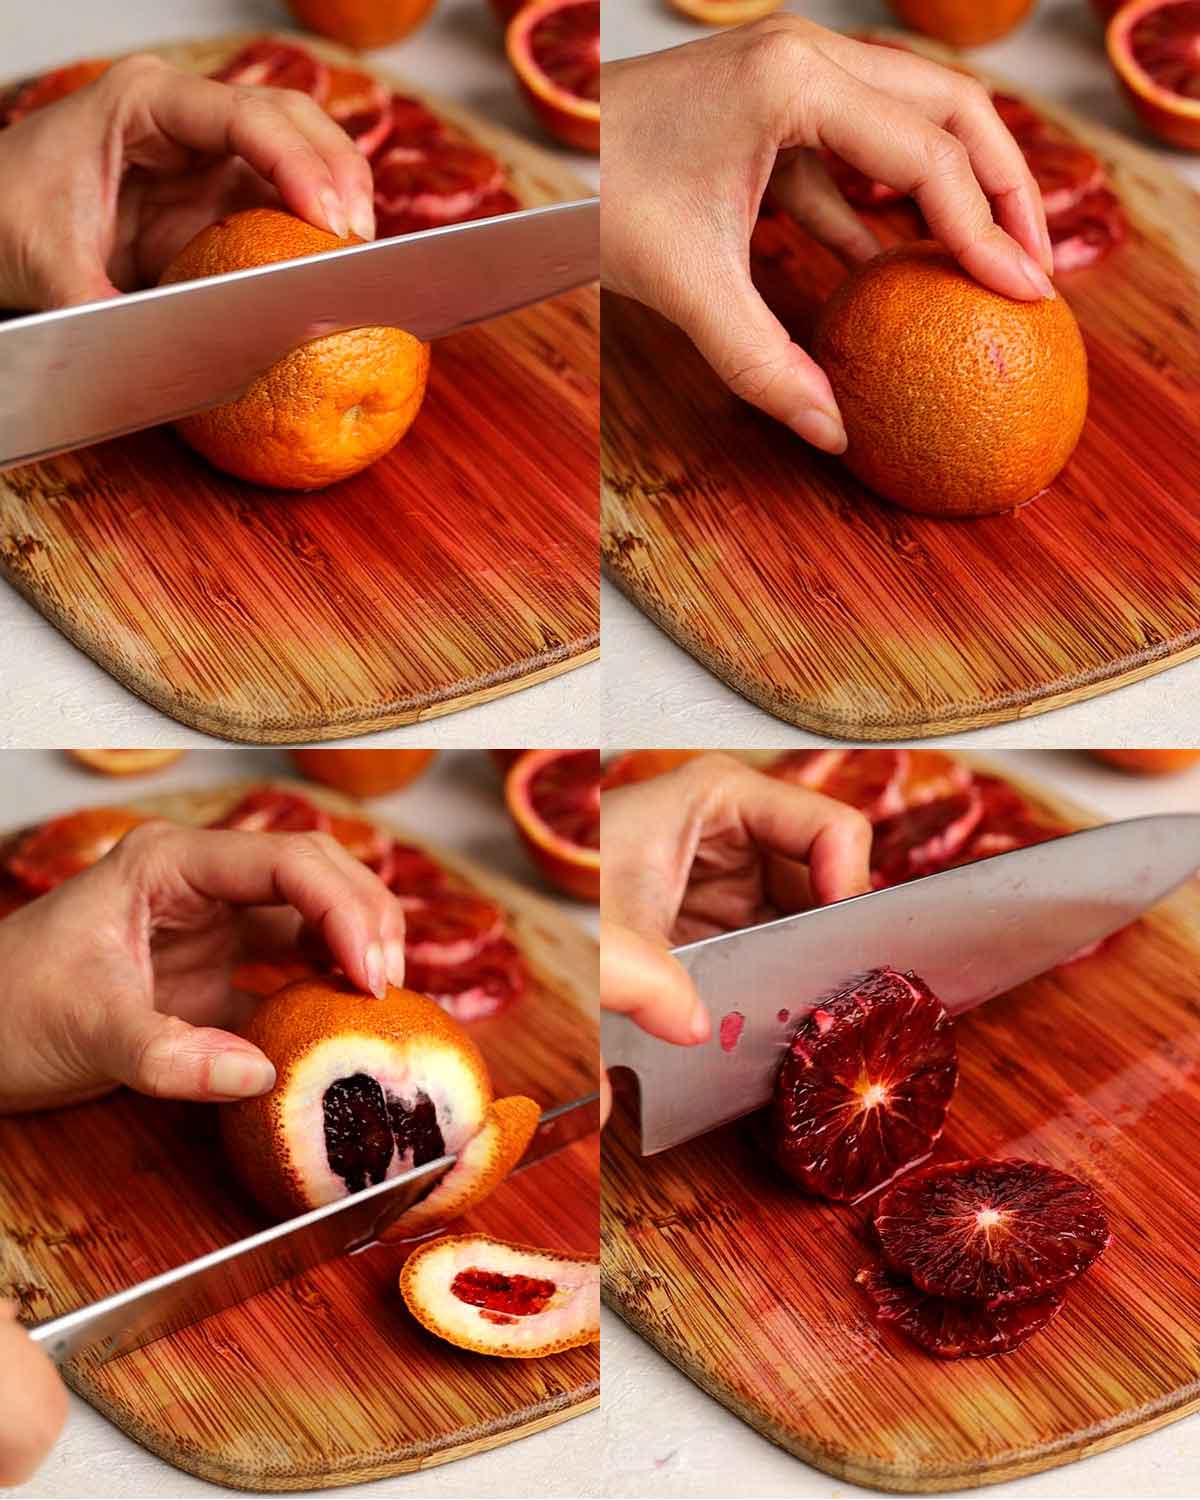 Four image collage showing how to peel and slice a blood orange.